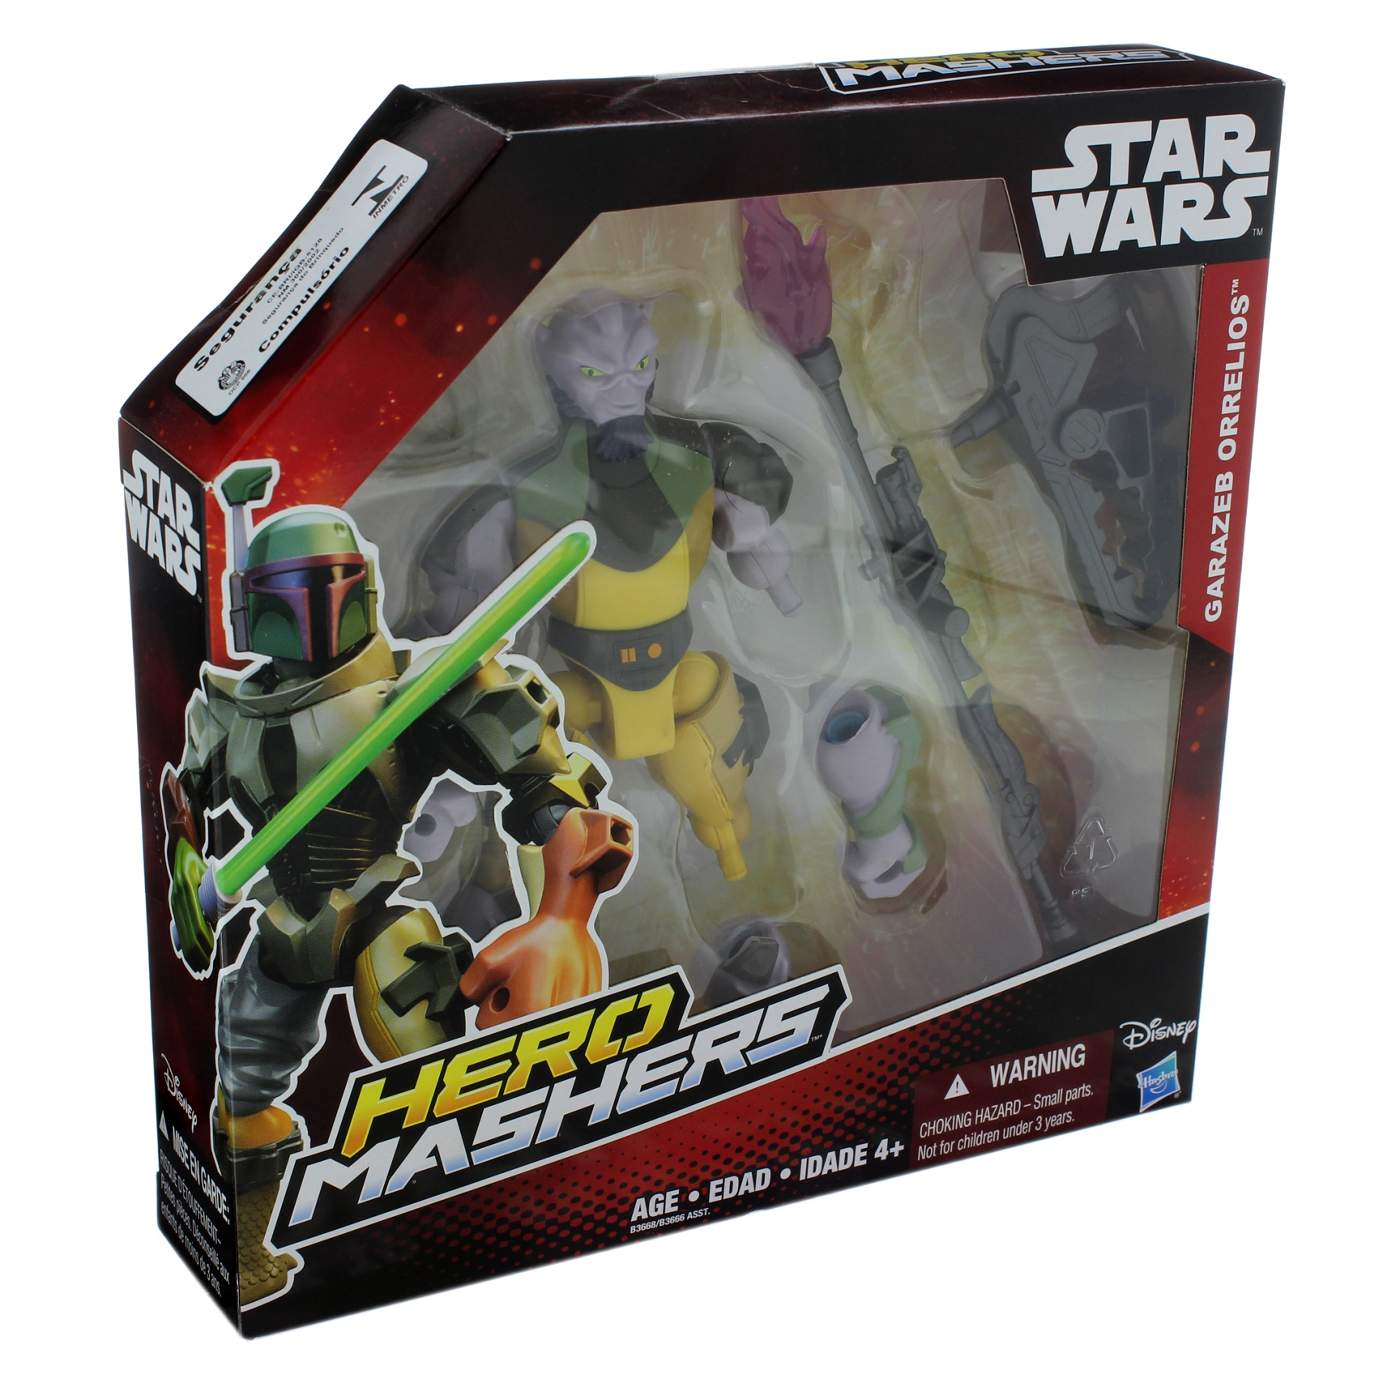 Hasbro Star Wars Hero Mashers Assorted Deluxe Figures, Characters May Vary; image 2 of 2